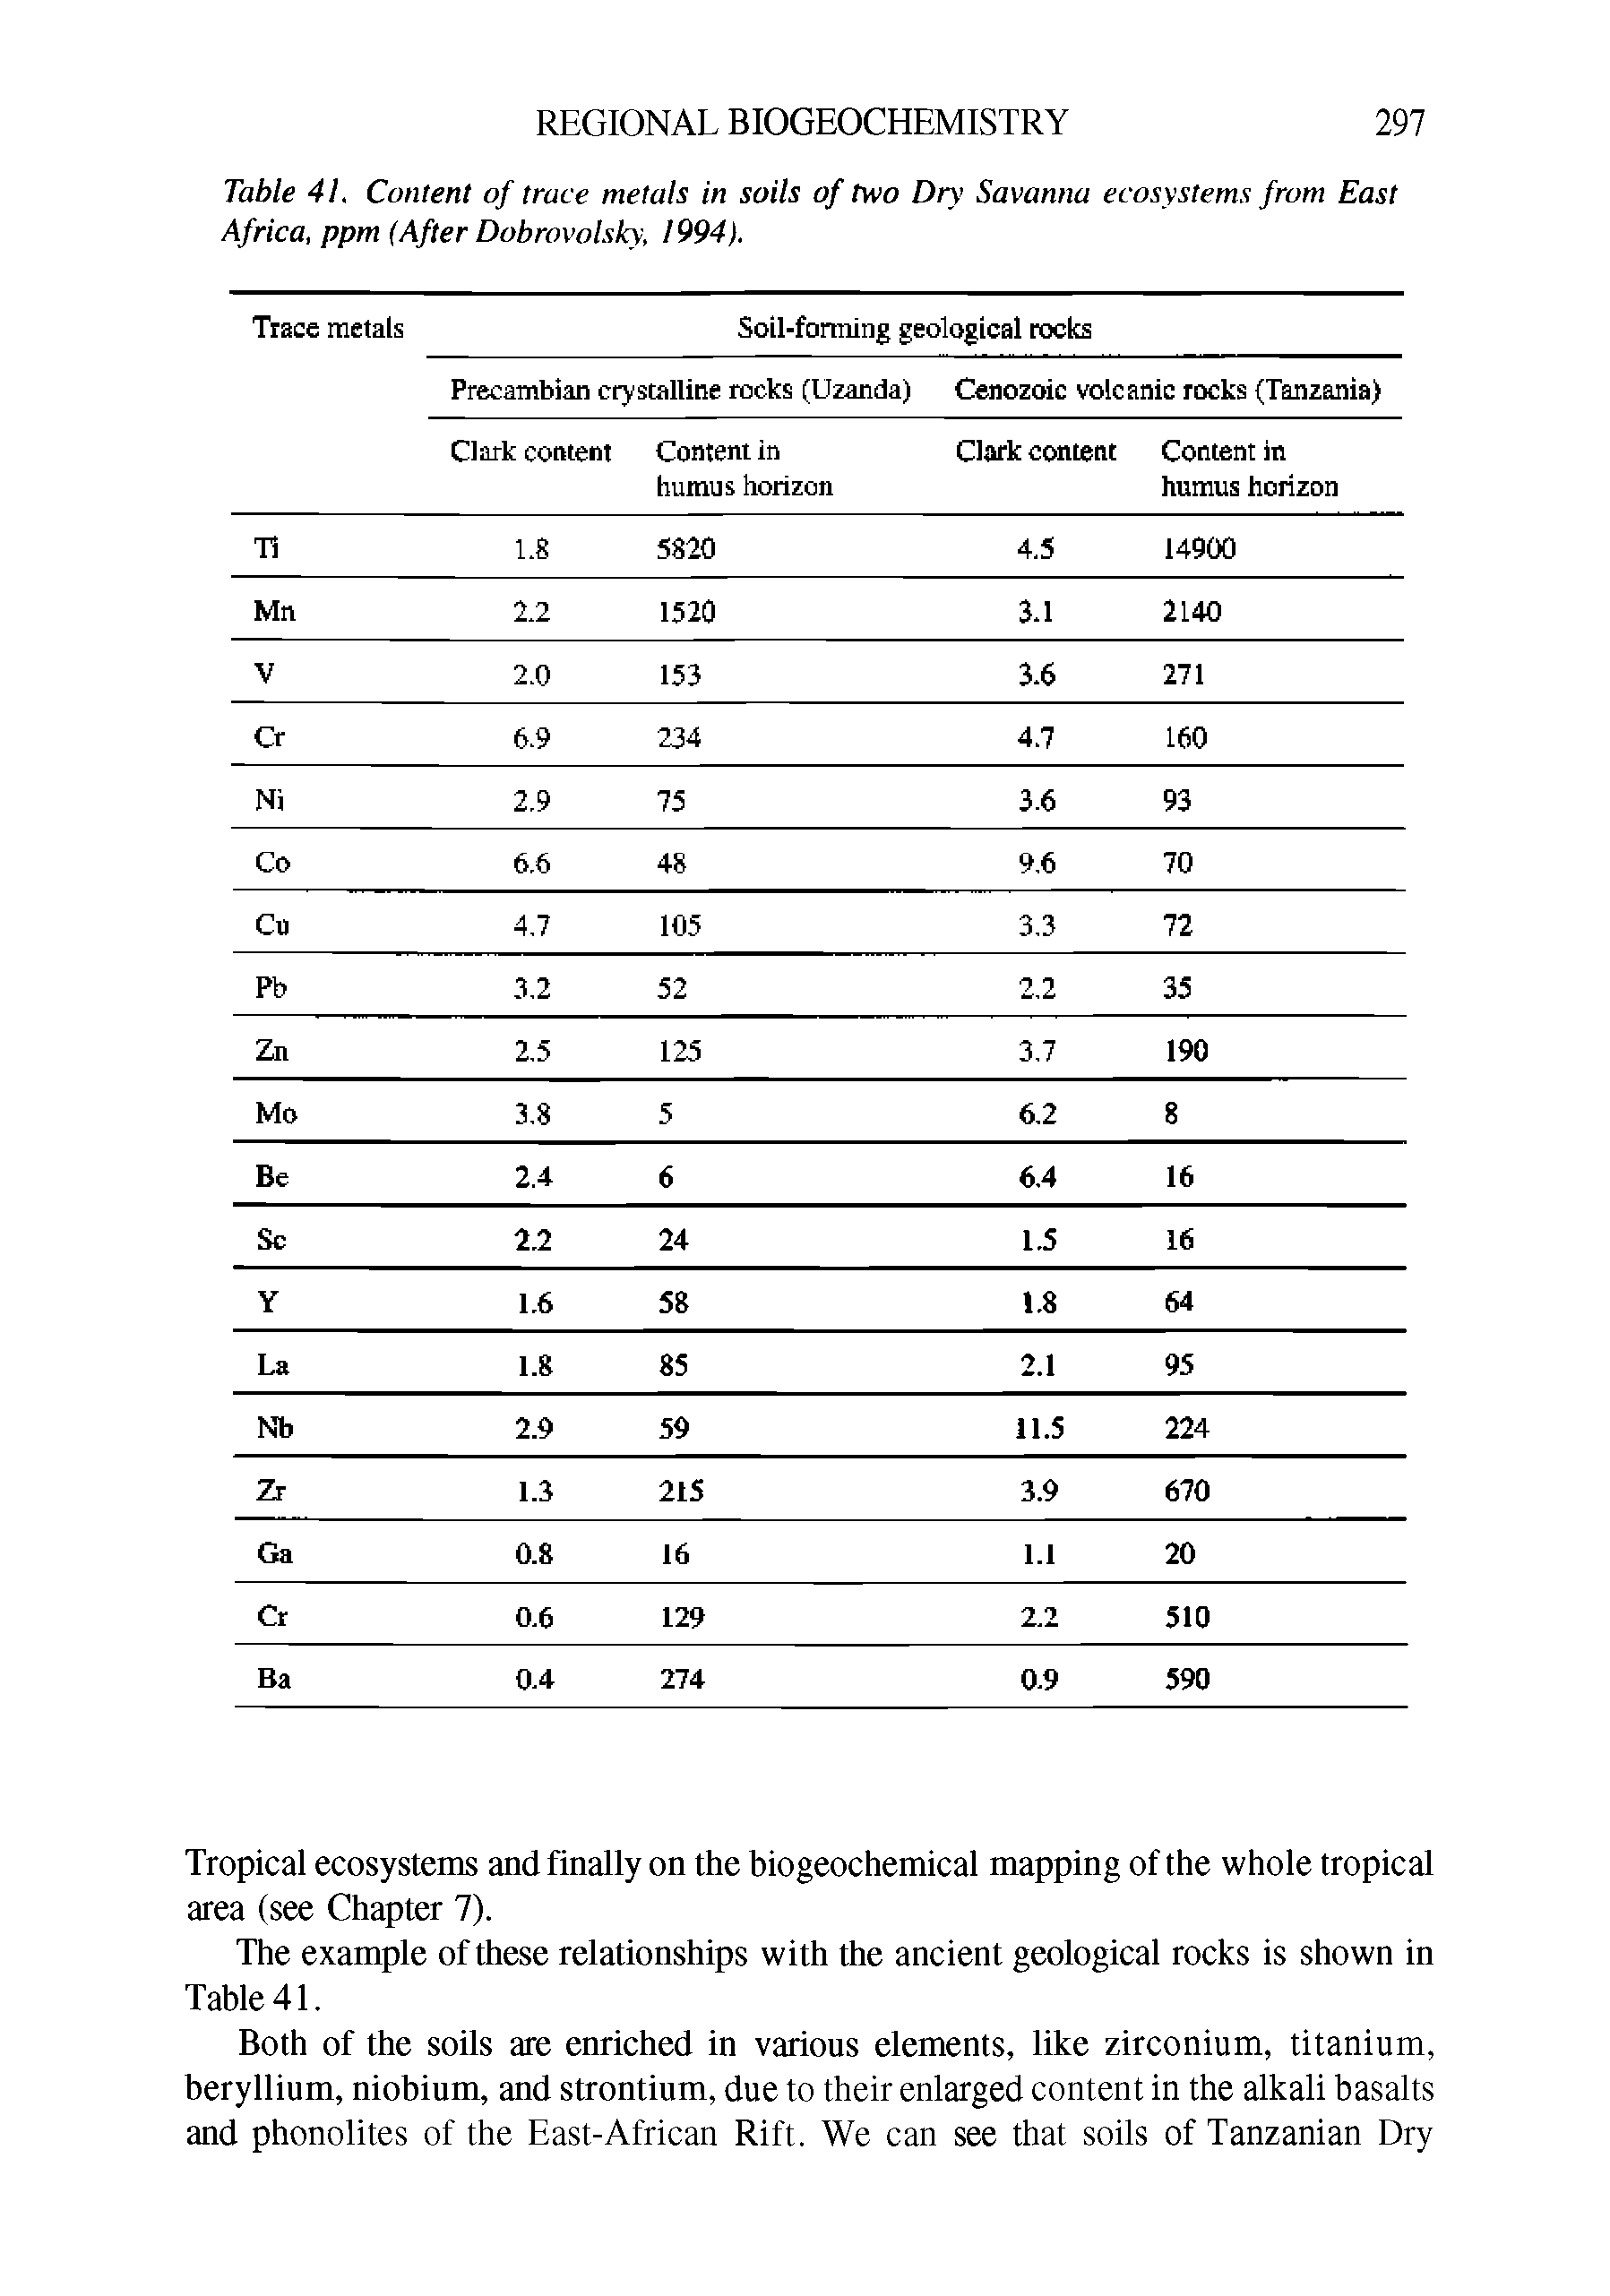 Table 41. Content of trace metals in soils of two Dry Savanna ecosystems from East Africa, ppm (After Dobrovolsky, 1994).